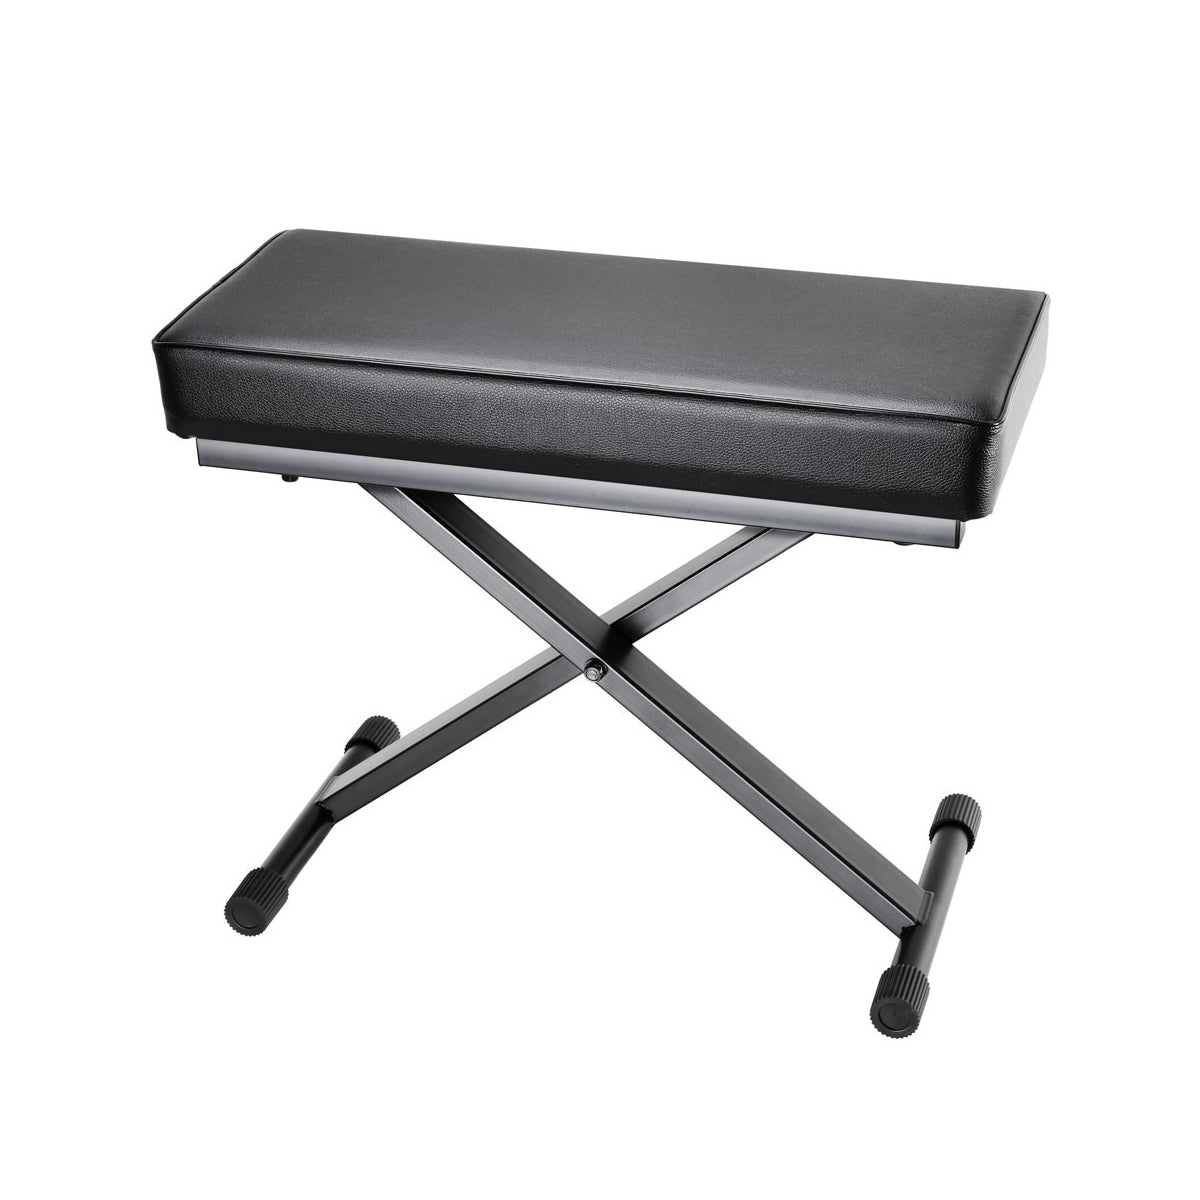 Adam Hall Stands SKT17 - Folding Keyboard Bench With Extra Thick Padding